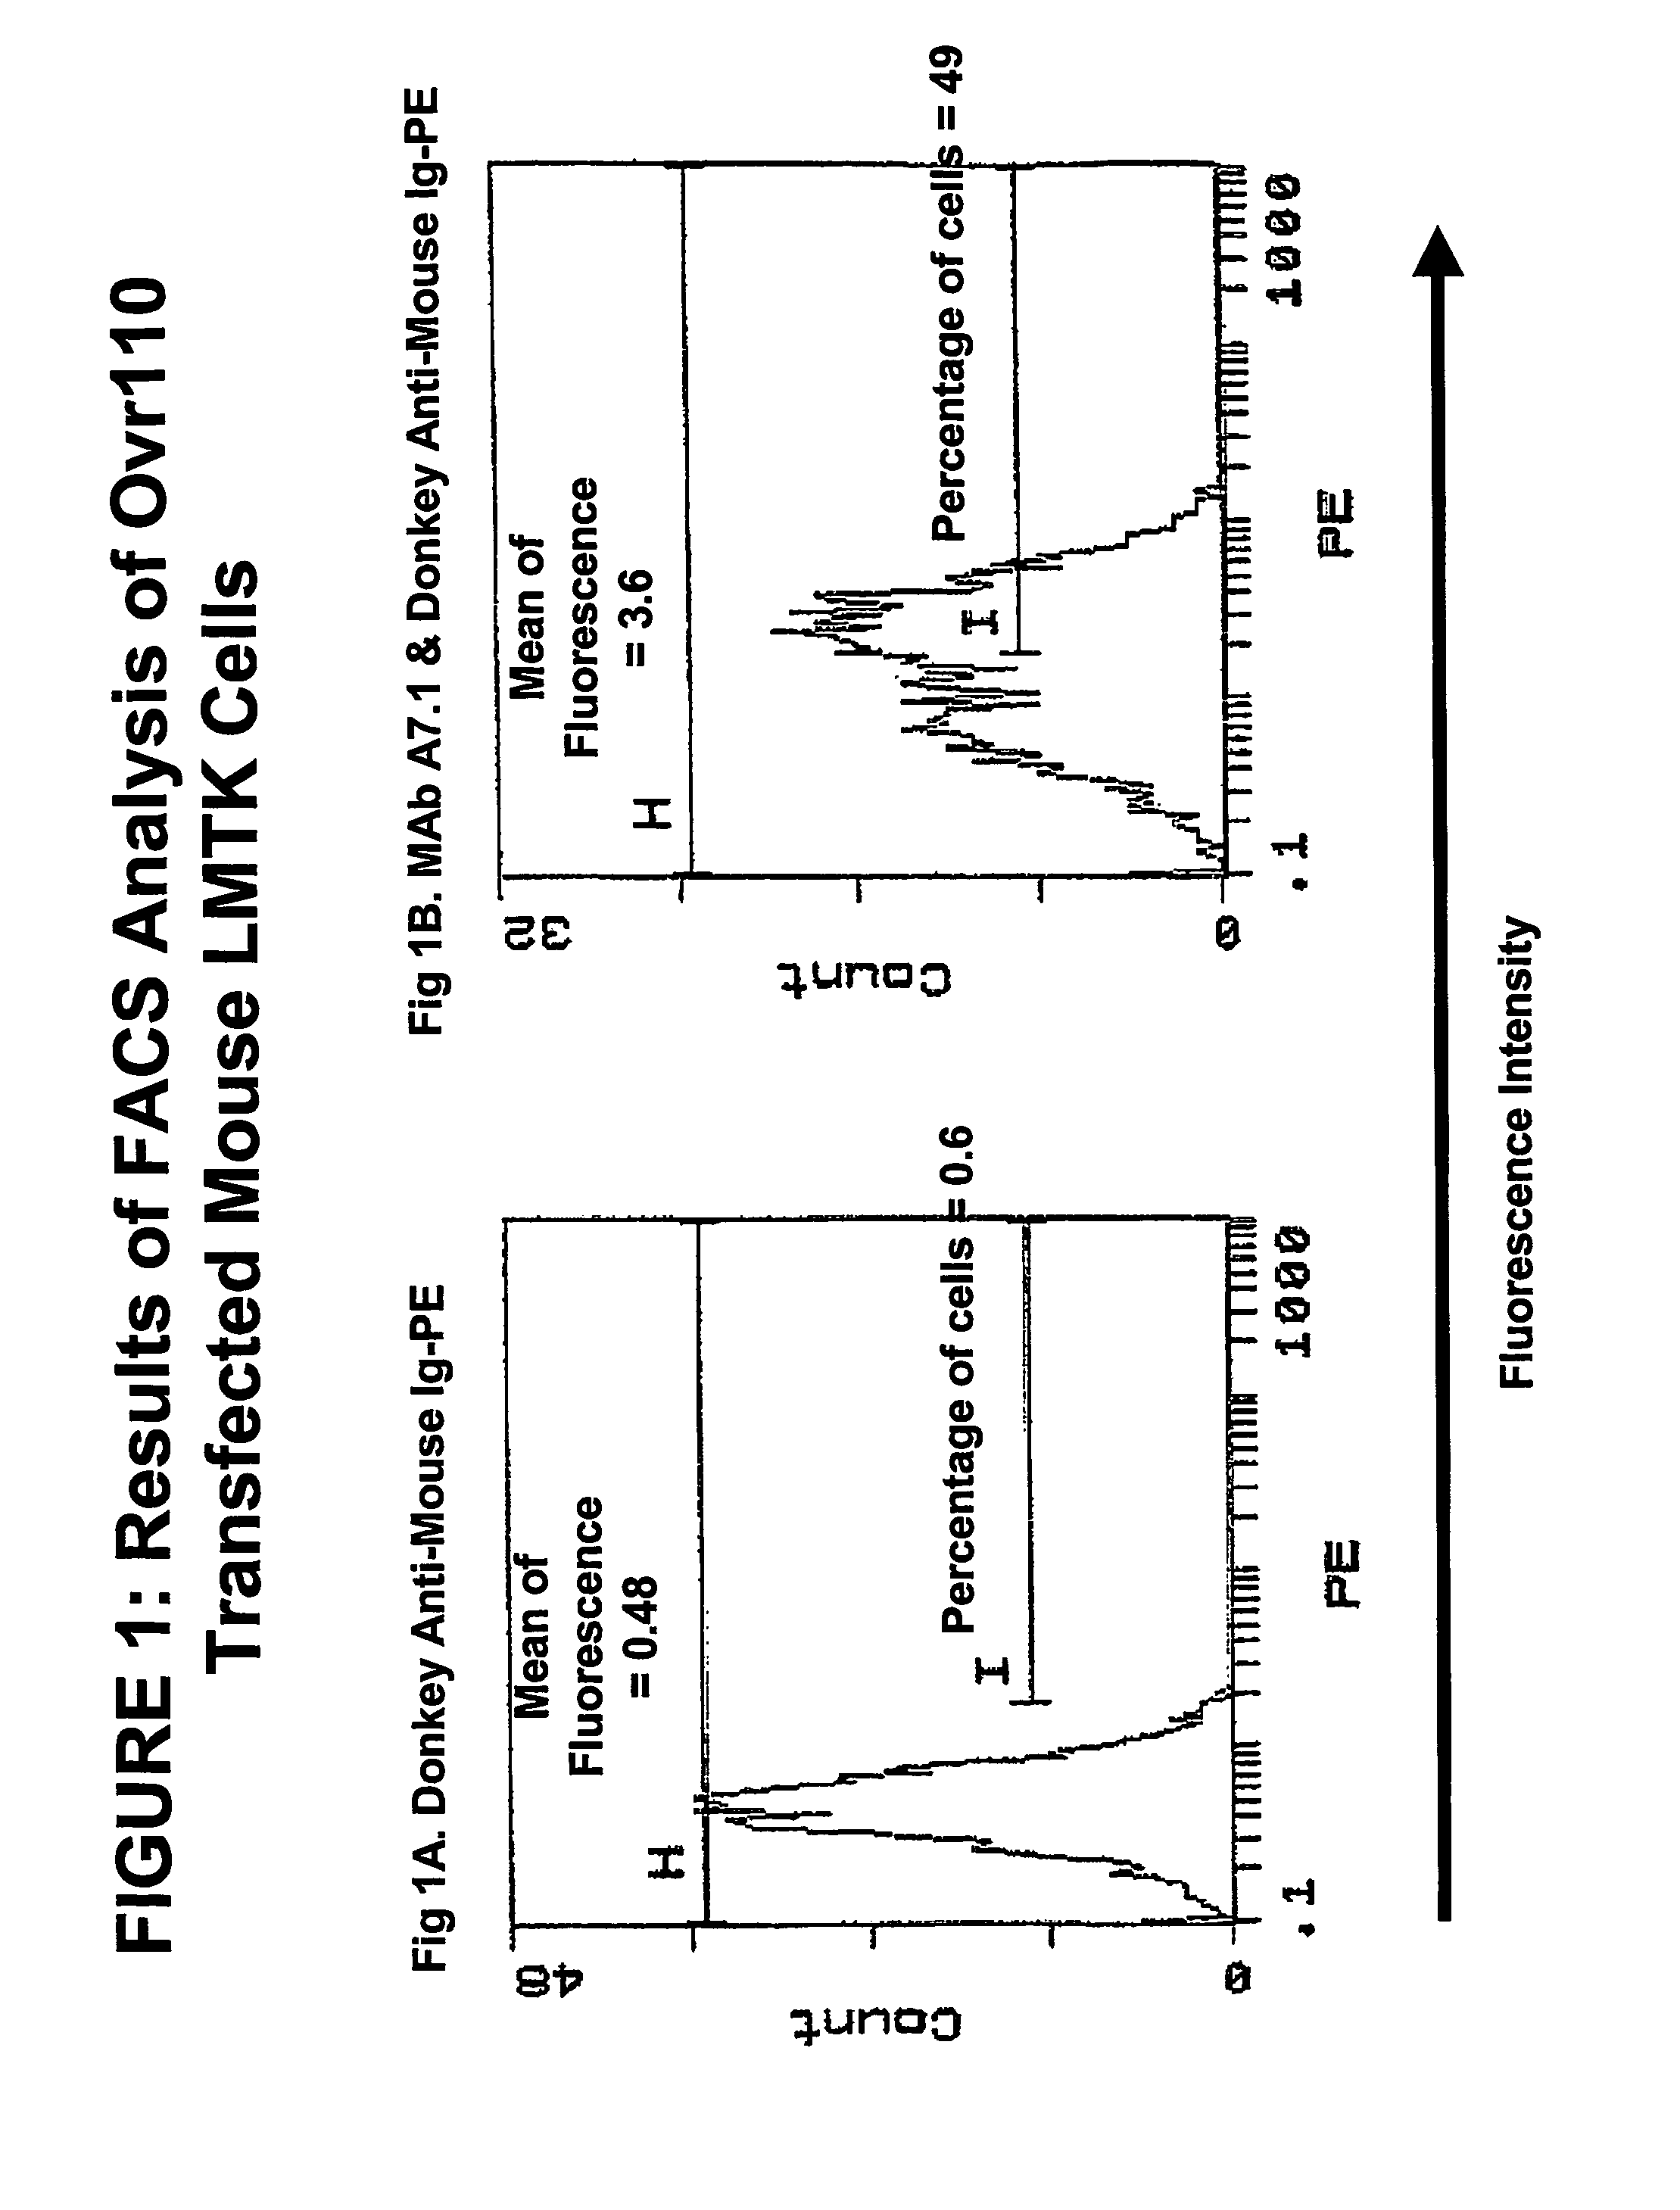 Ovr110 antibody compositions and methods of use